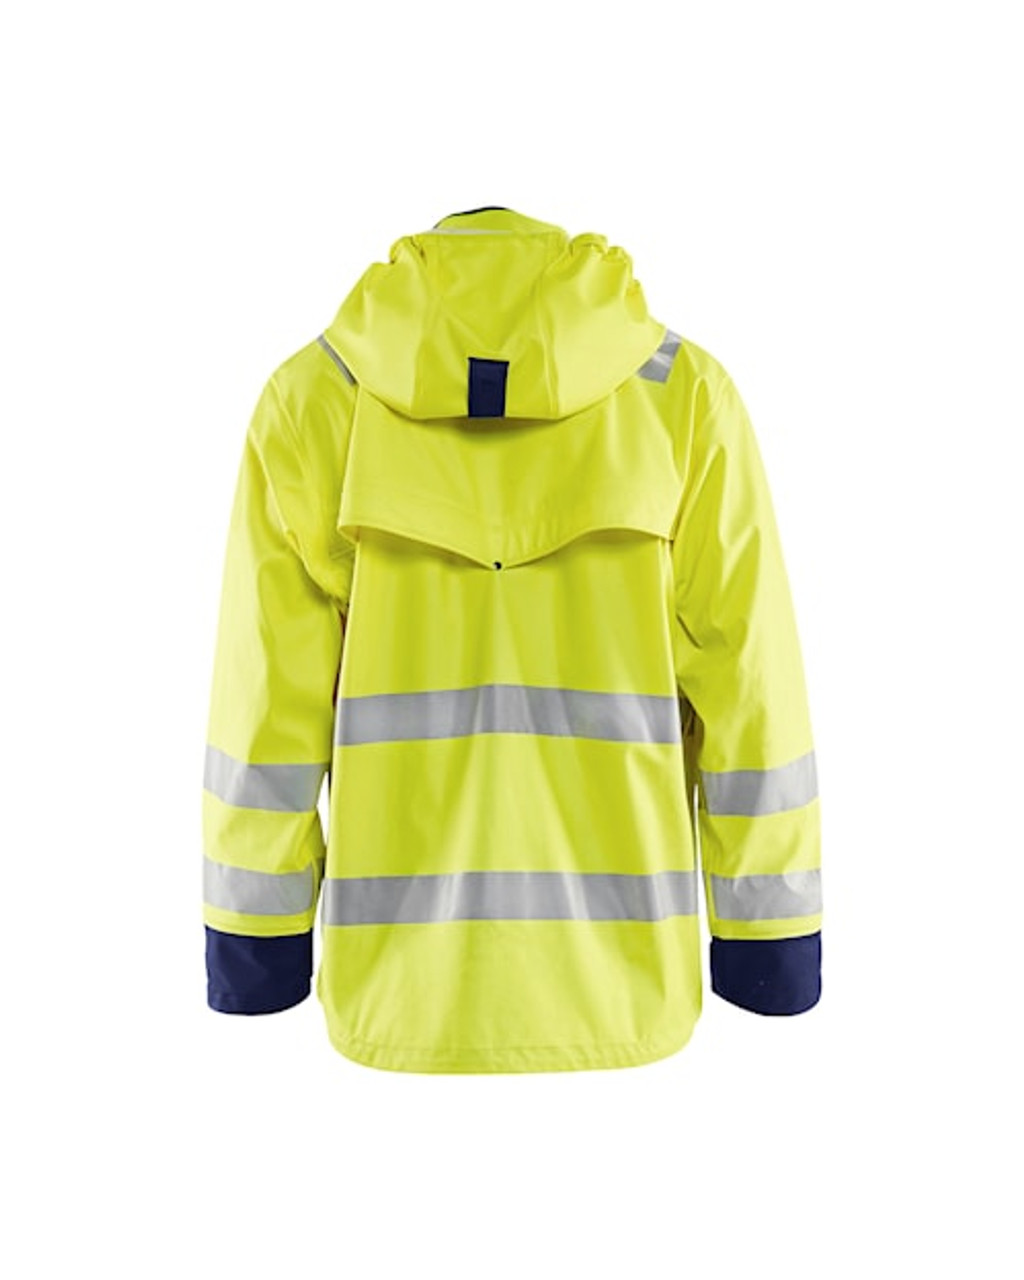 BLAKLADER Rain Jacket  4302 with  for BLAKLADER Rain Jacket | 4302 High Vis Yellow / Navy Blue Craftsman Rain Jacket with Reflective Tape Polyester Waterproof that have  available in Australia and New Zealand